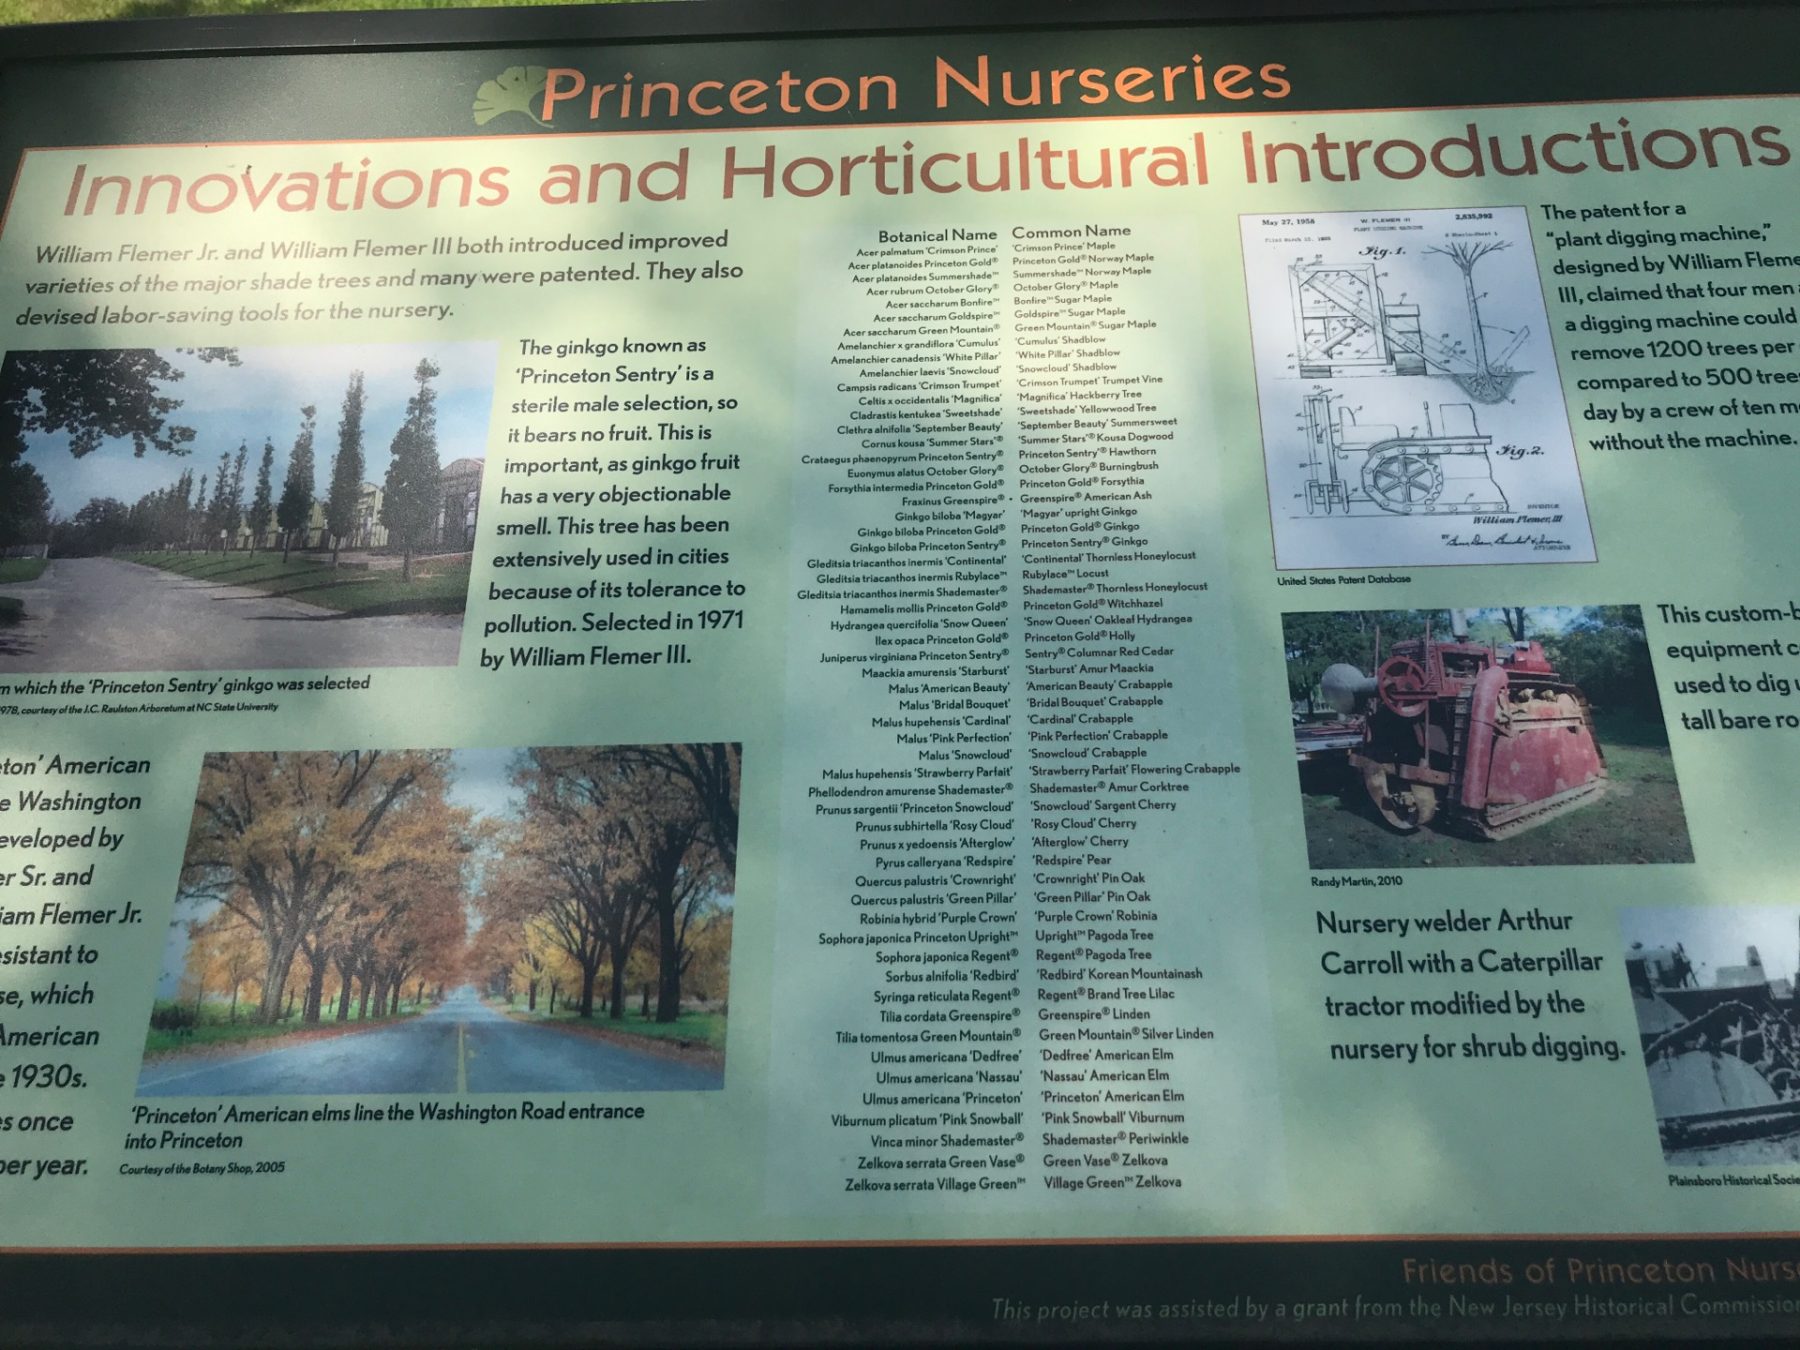 Checked in at Princeton Nursery Lands